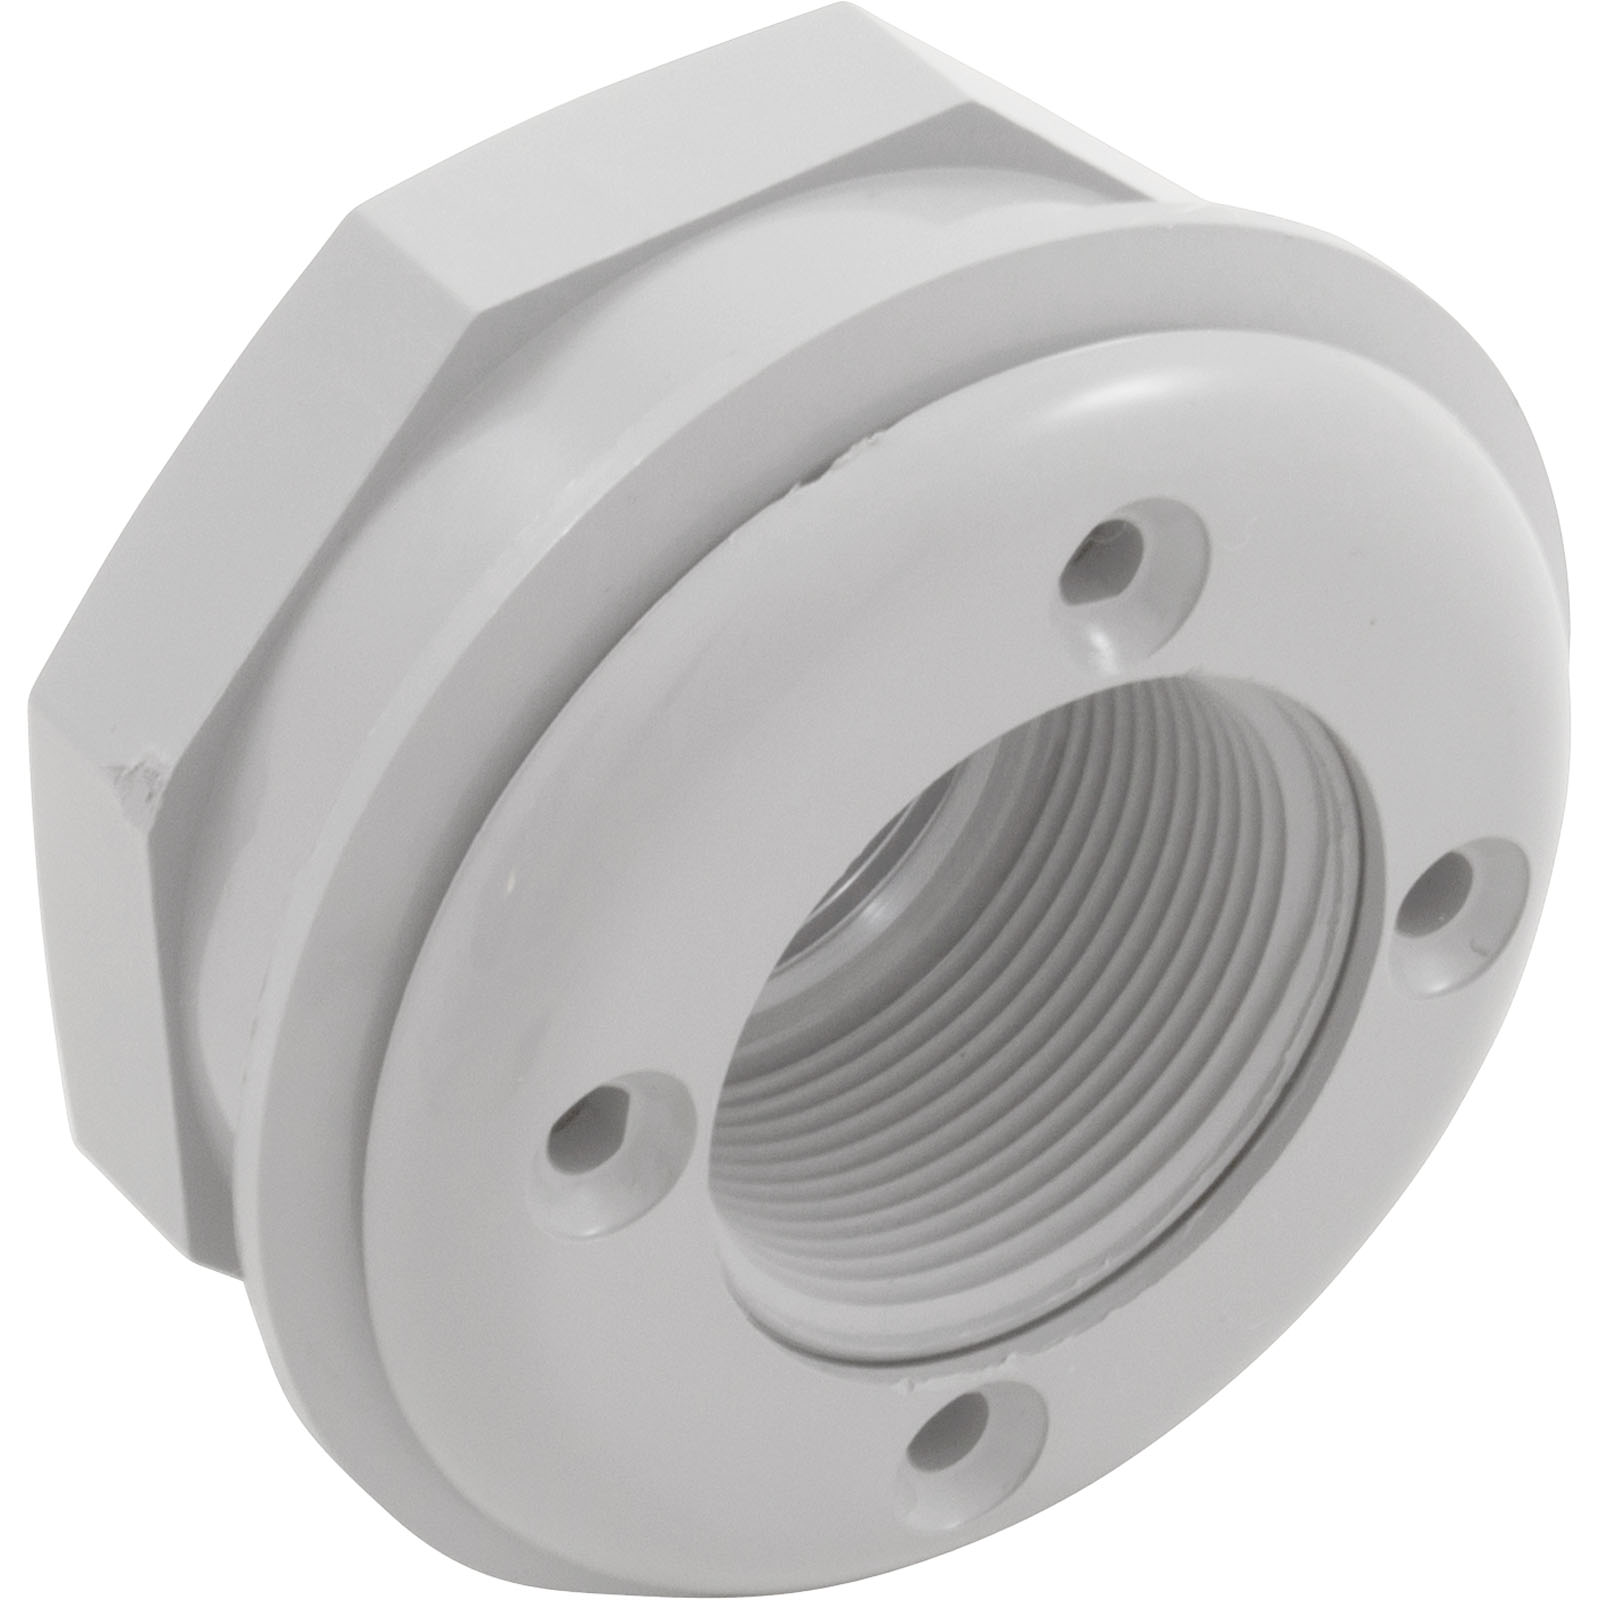 Picture of 25522-000-000 Wall Fitting CMP 3"hs 1-1/2"mpt 3-1/2"fd w/Nut White